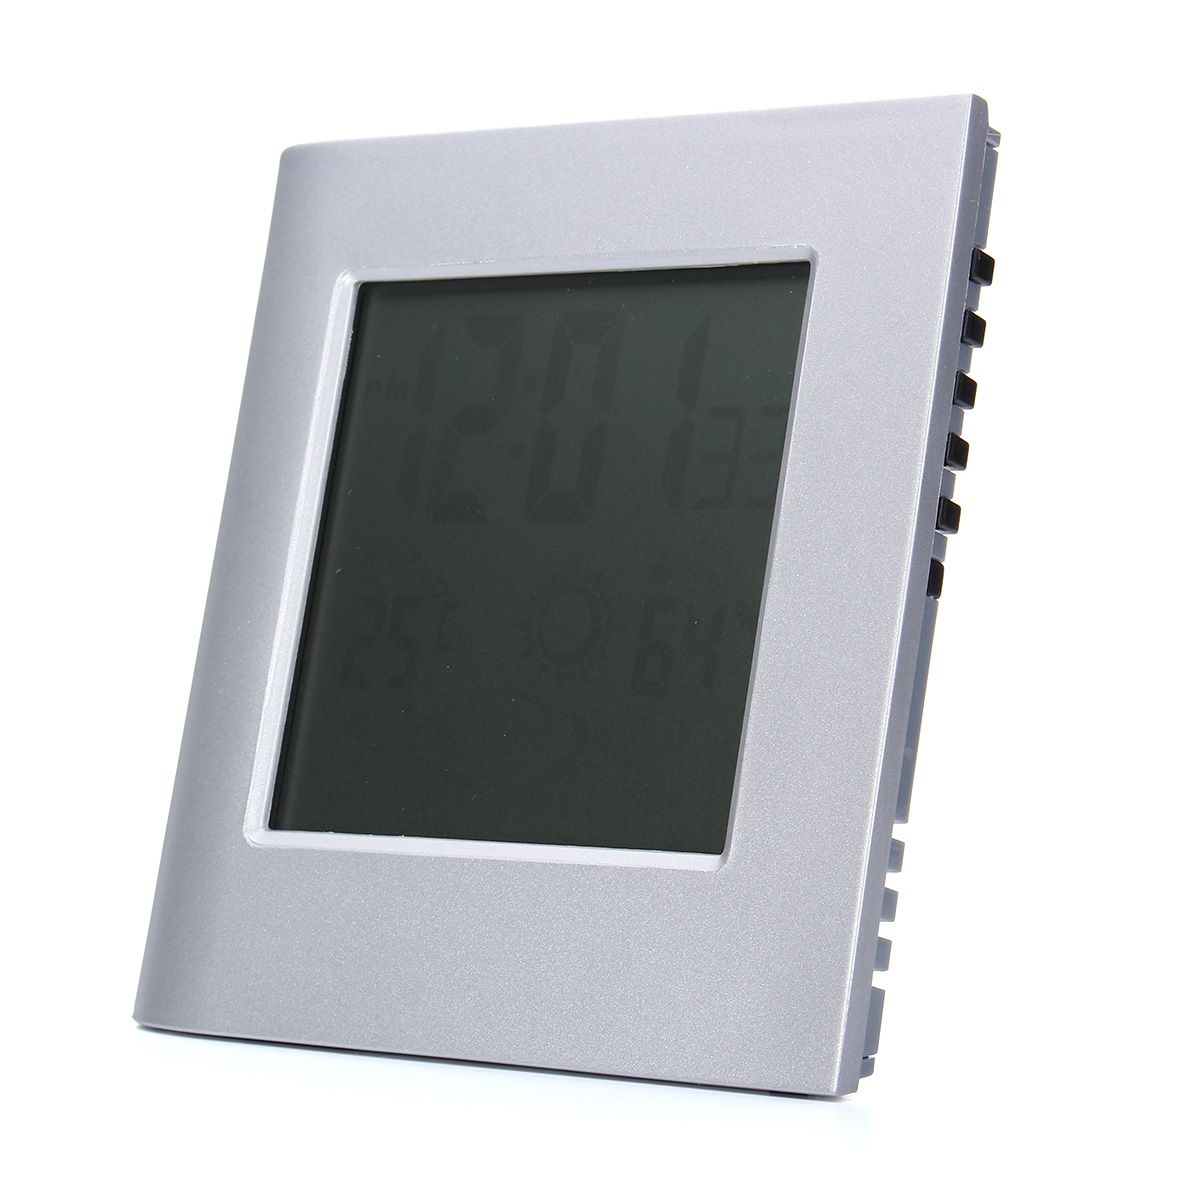 Solar-Battery-Wireless-Weather-Station-Clock-Temperature-Sensor-Meter-Humidity-Thermometer-1218739